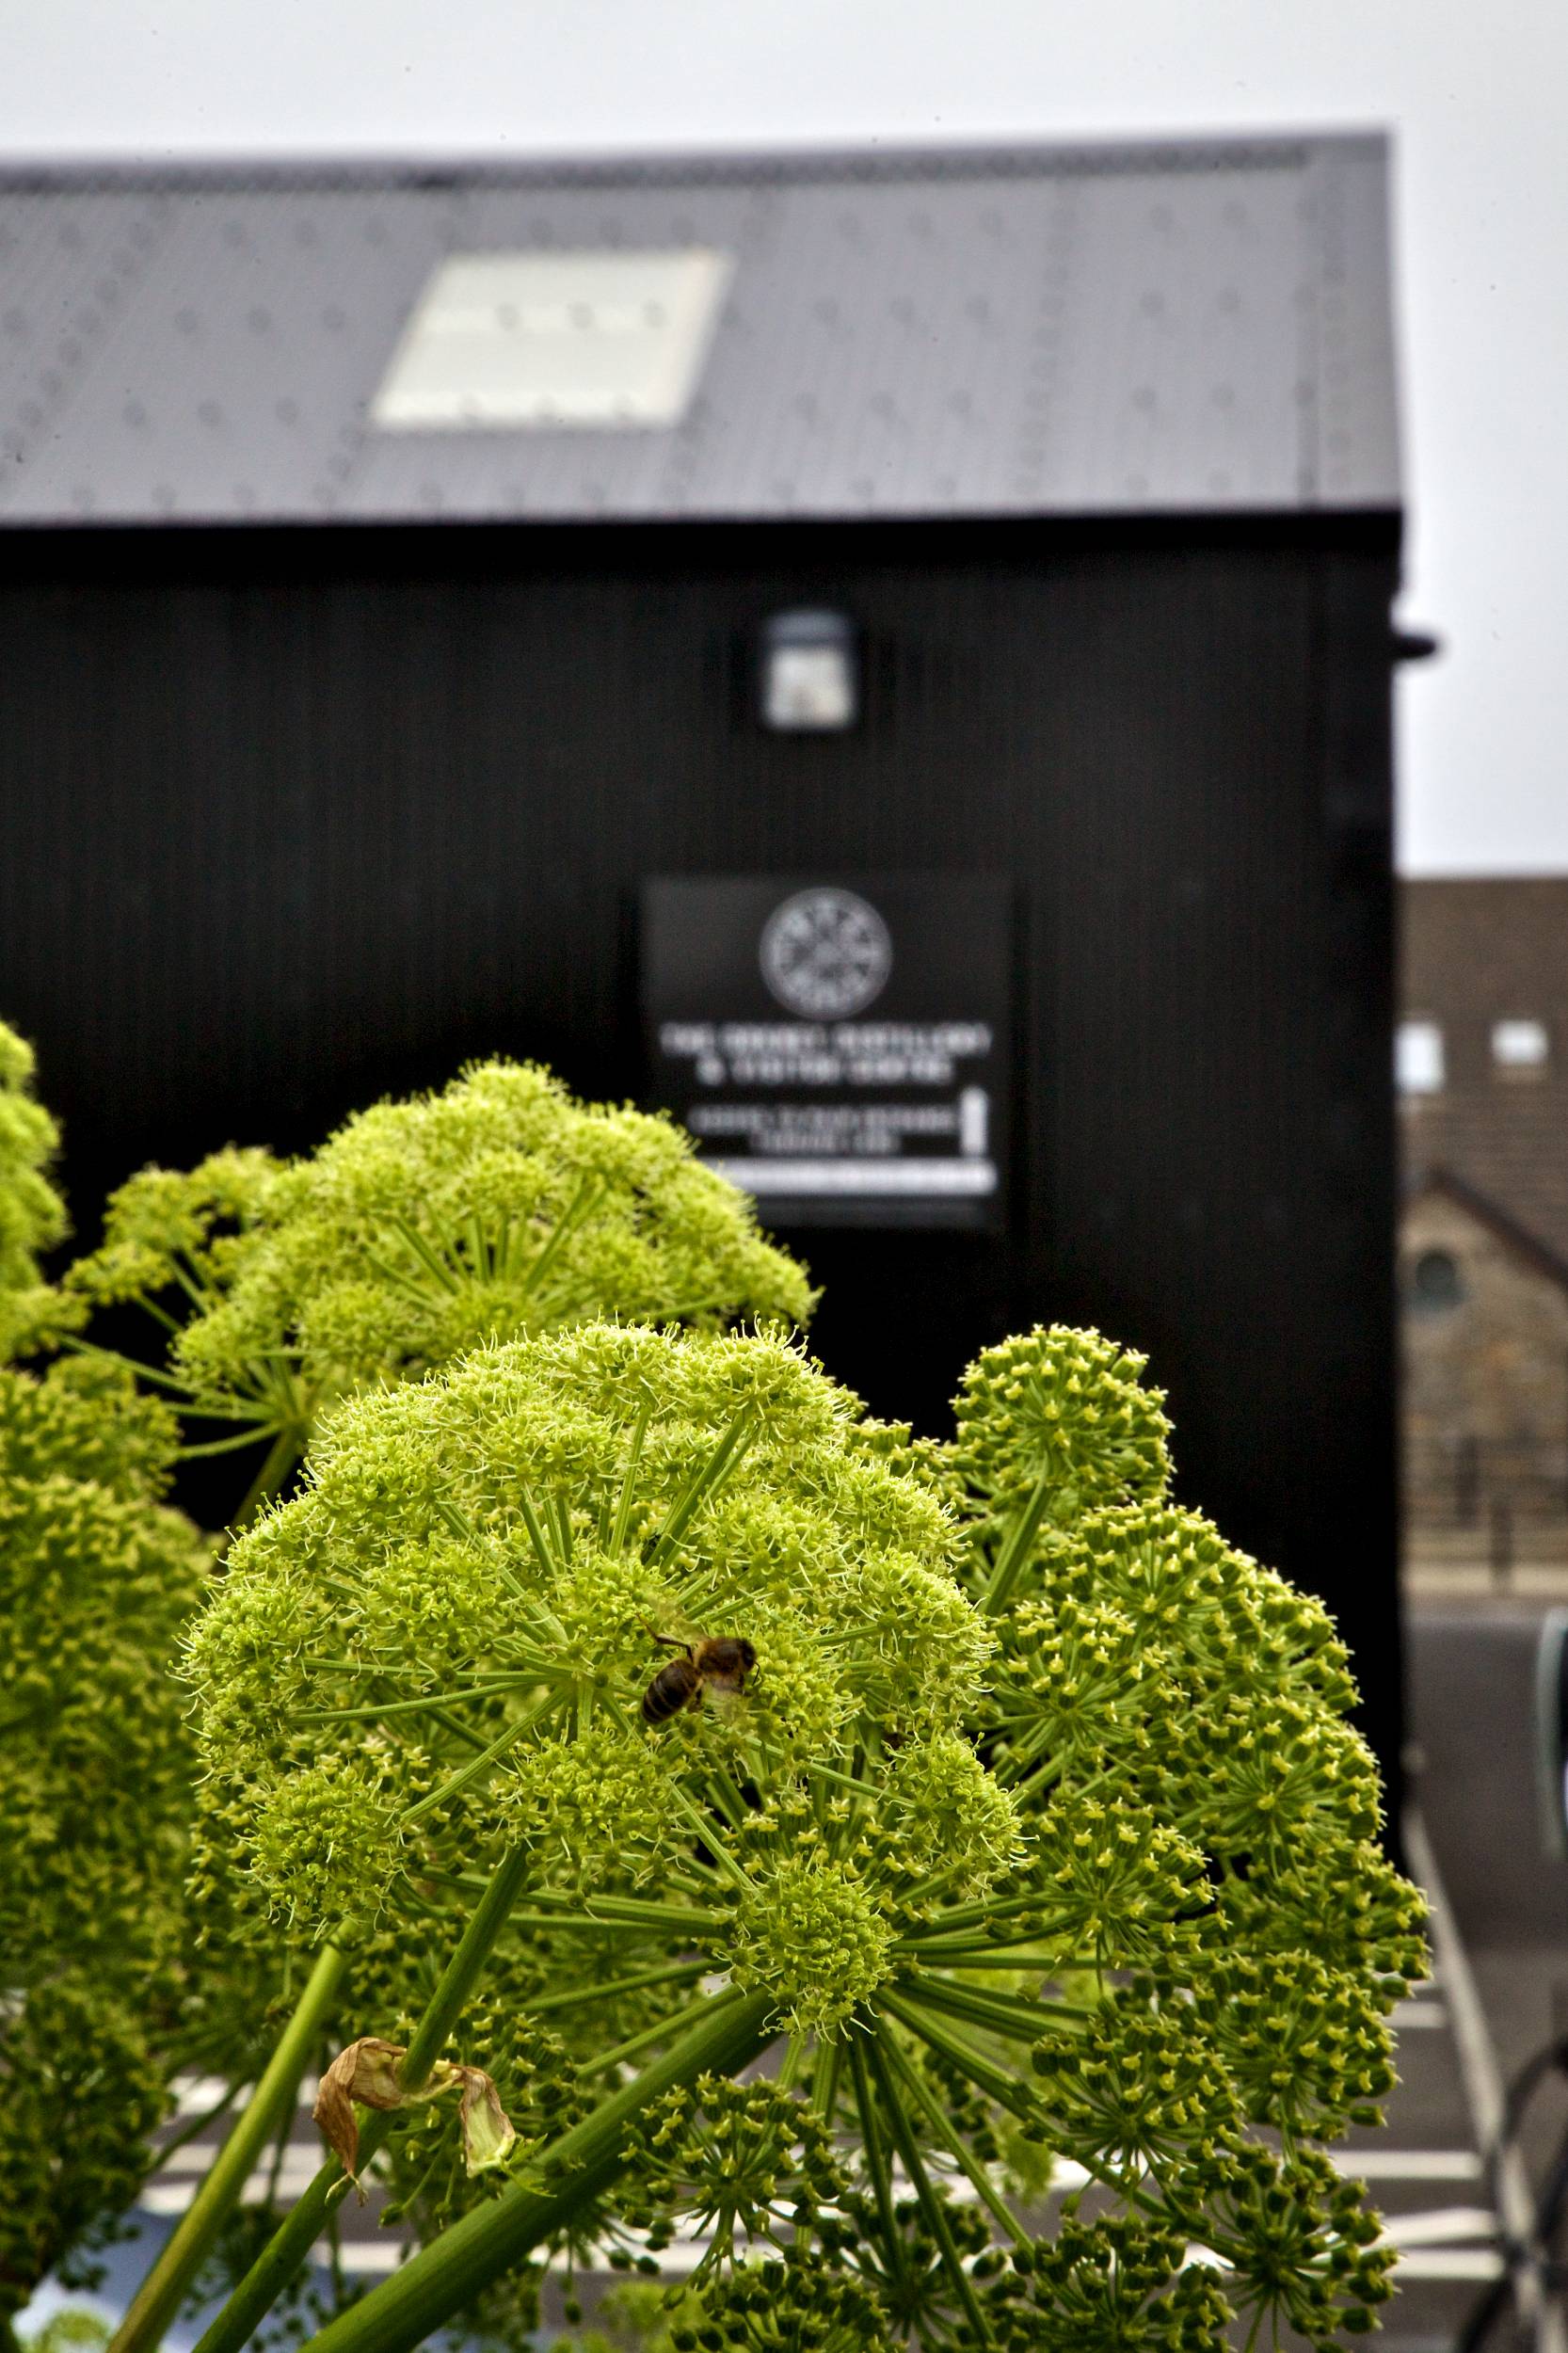 Orkney gin botanicals outside the distillery